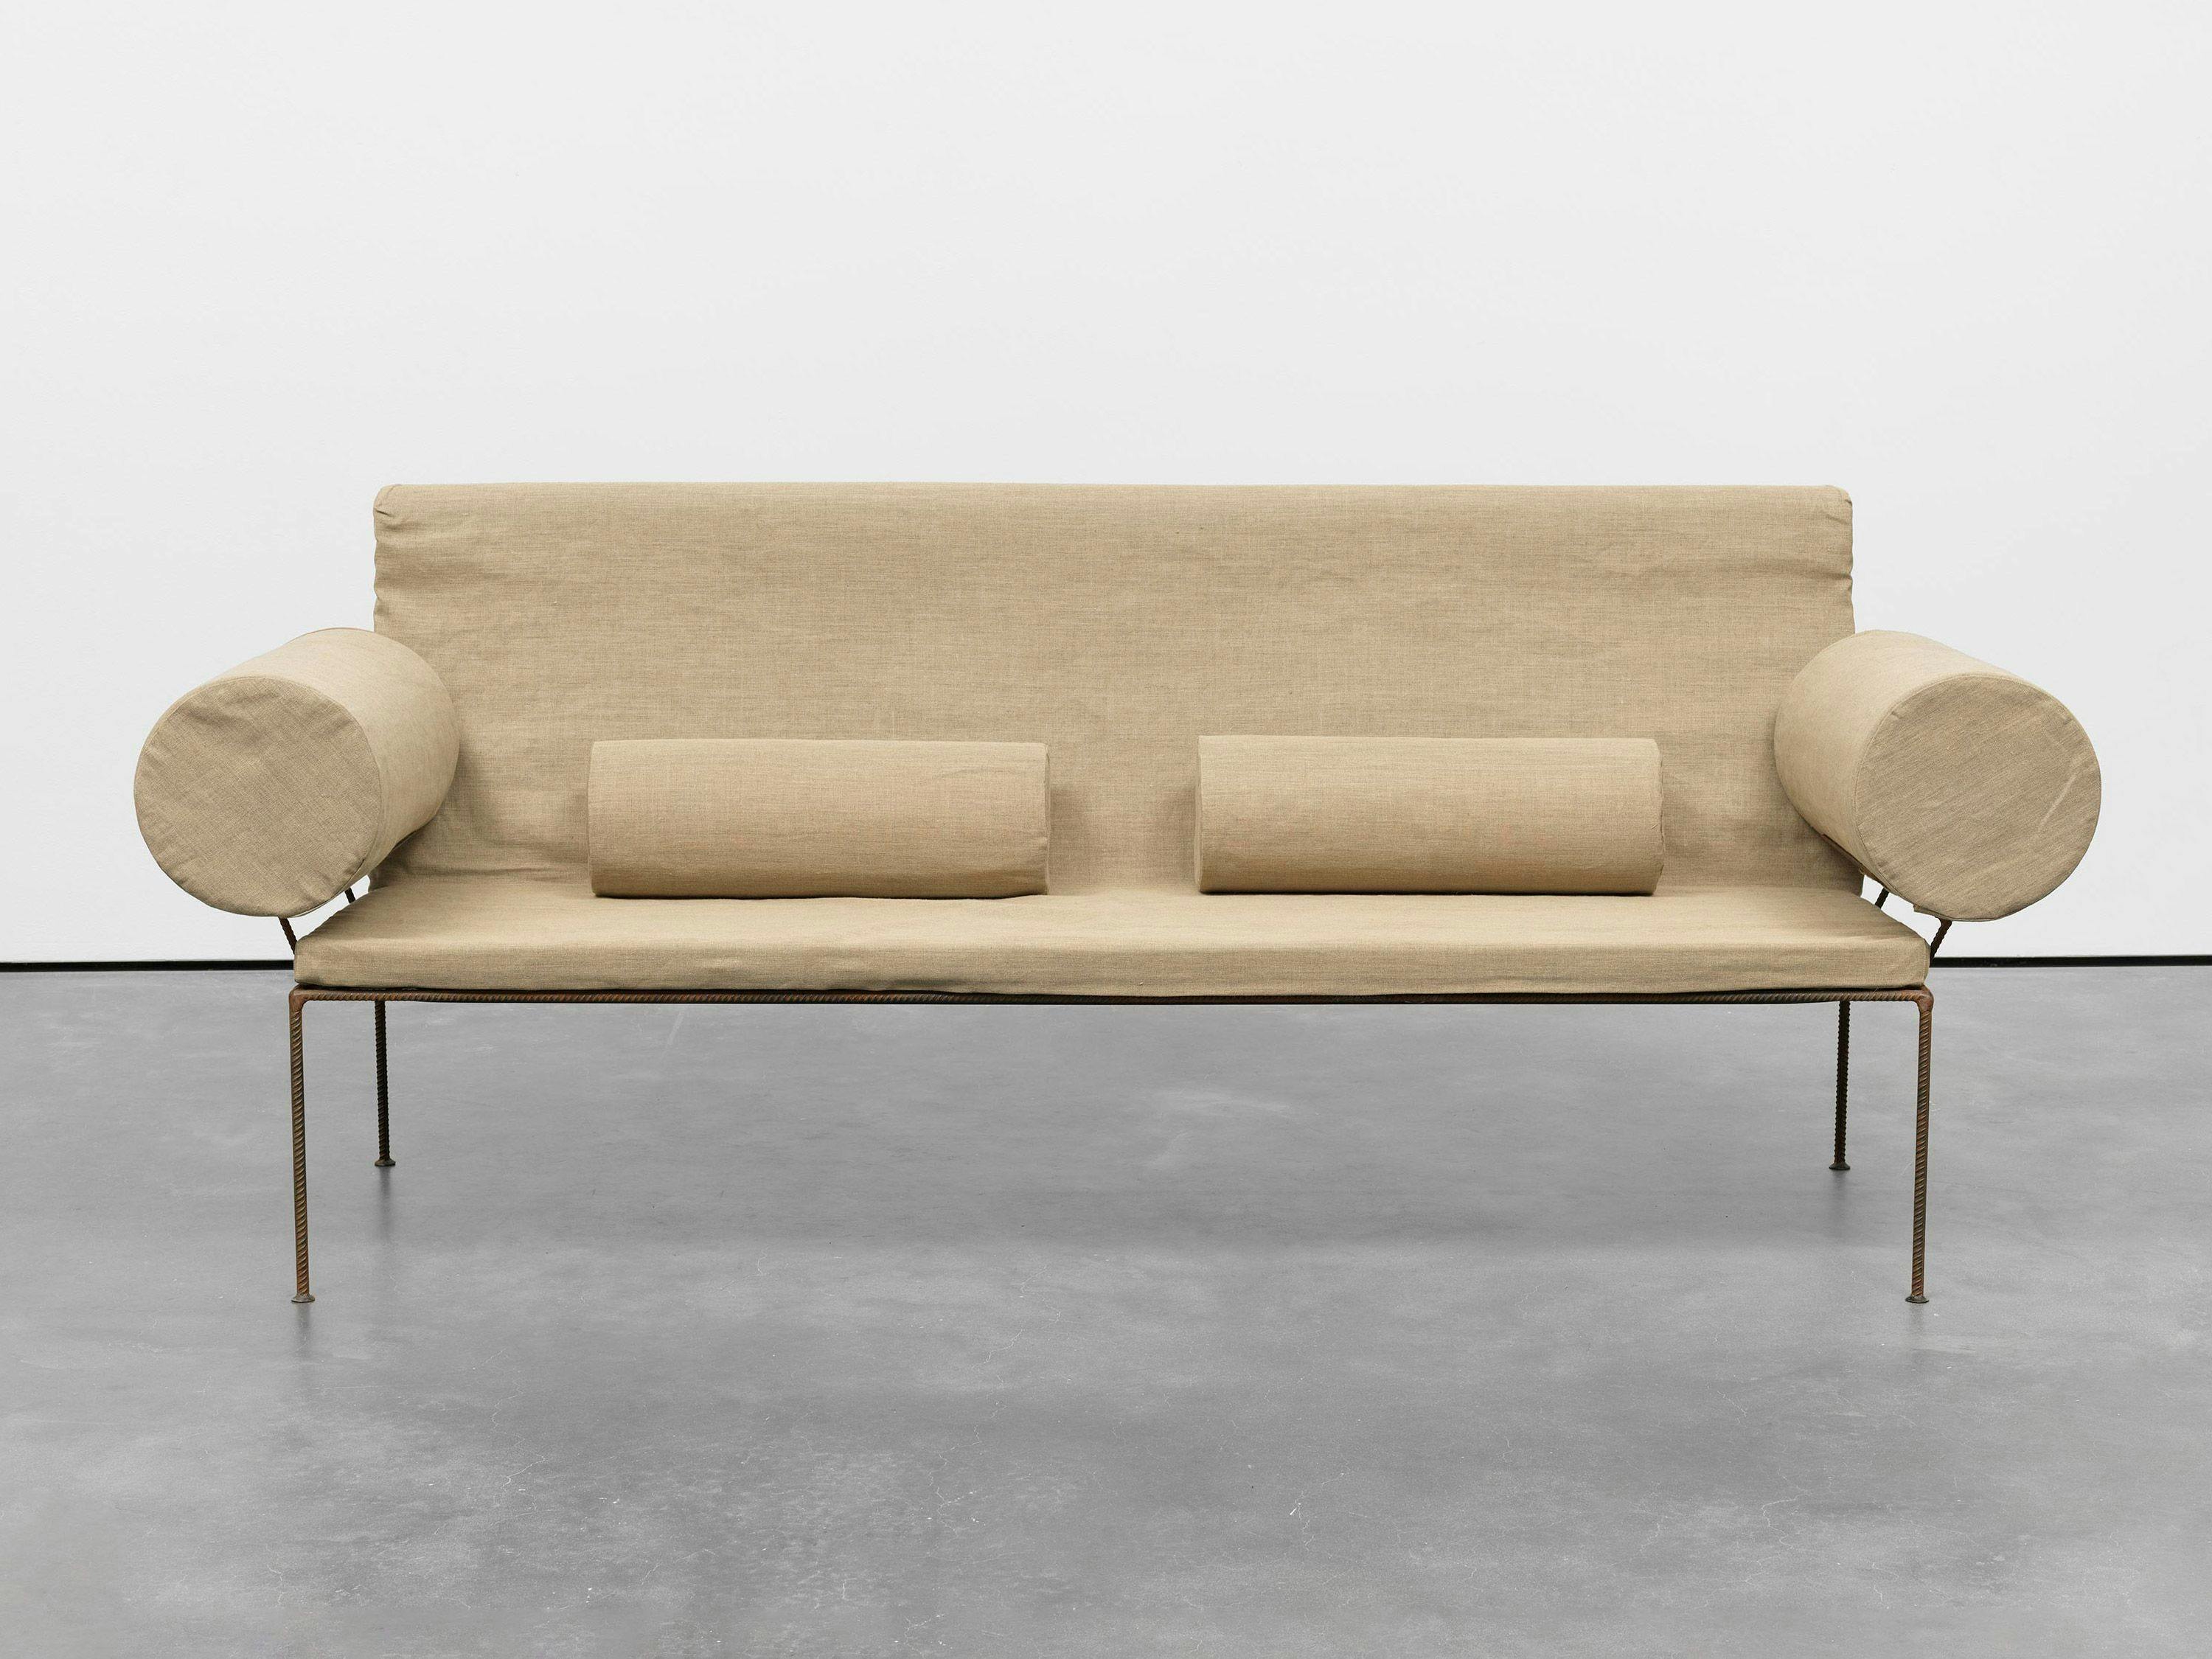 Furniture by Franz West, titled Diwan (Divan), dated in 1991 and 2015.